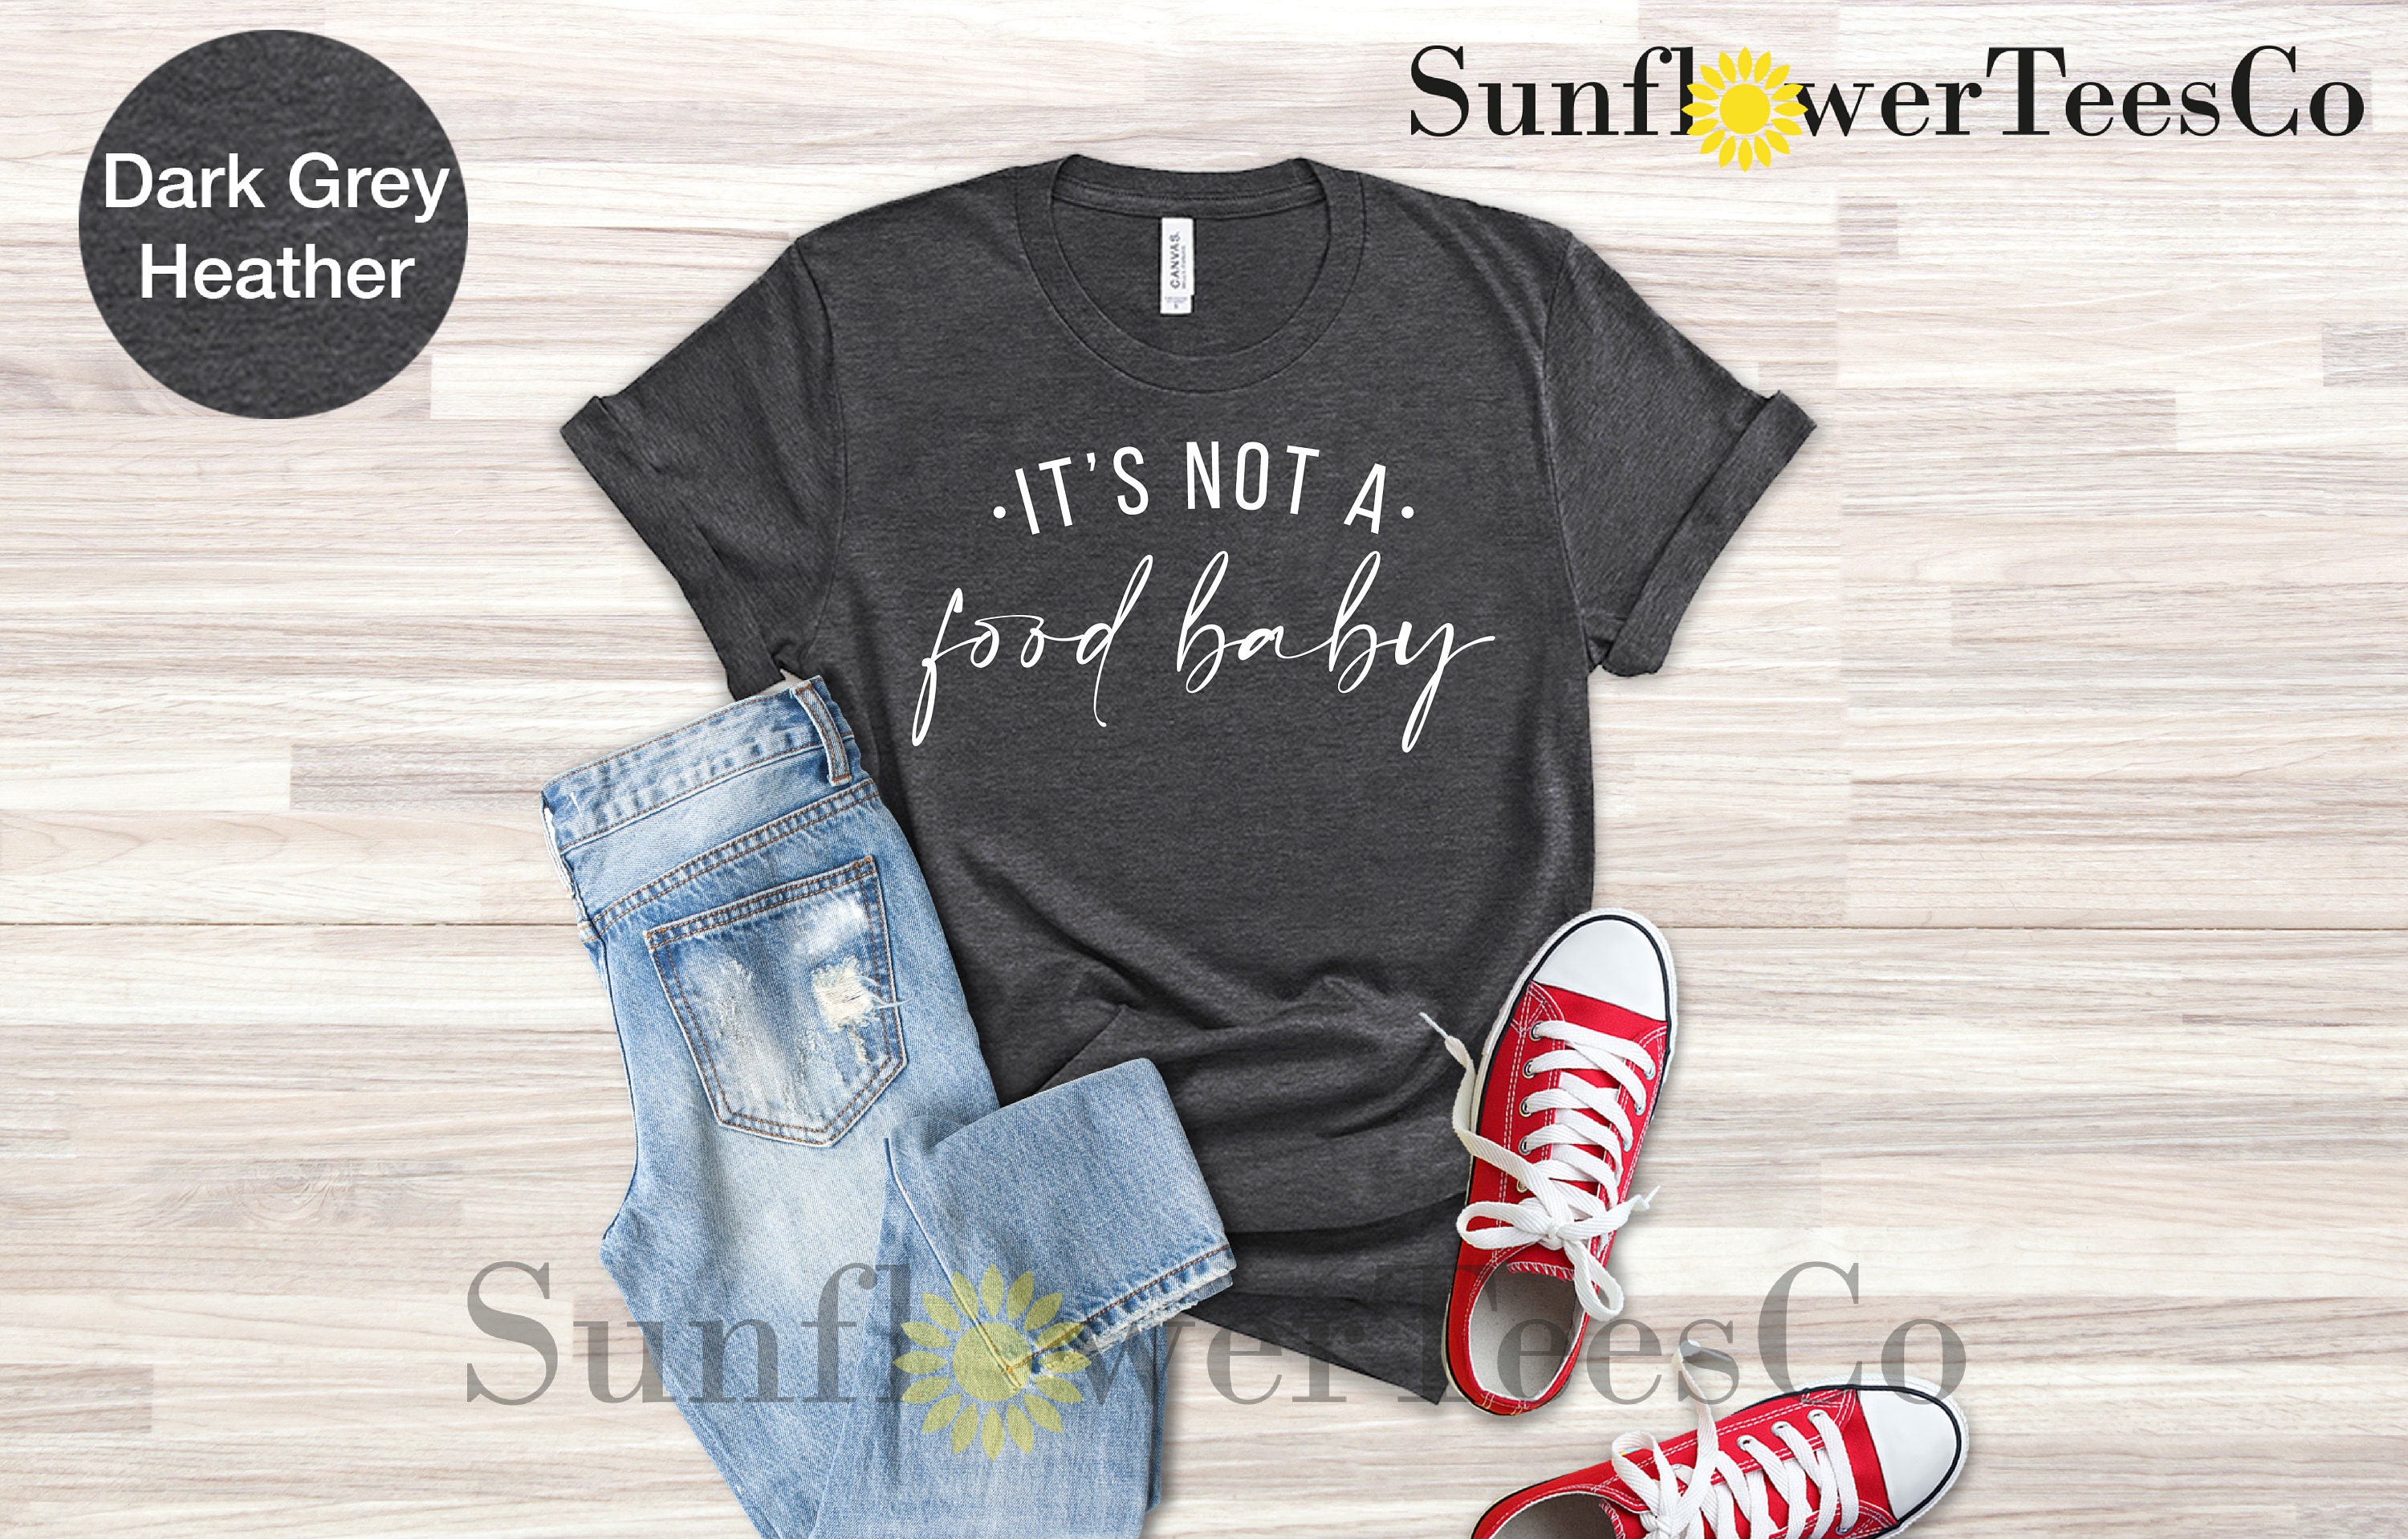 It's Not A Food Baby Shirt Funny Pregnancy Shirt New Mom | Etsy